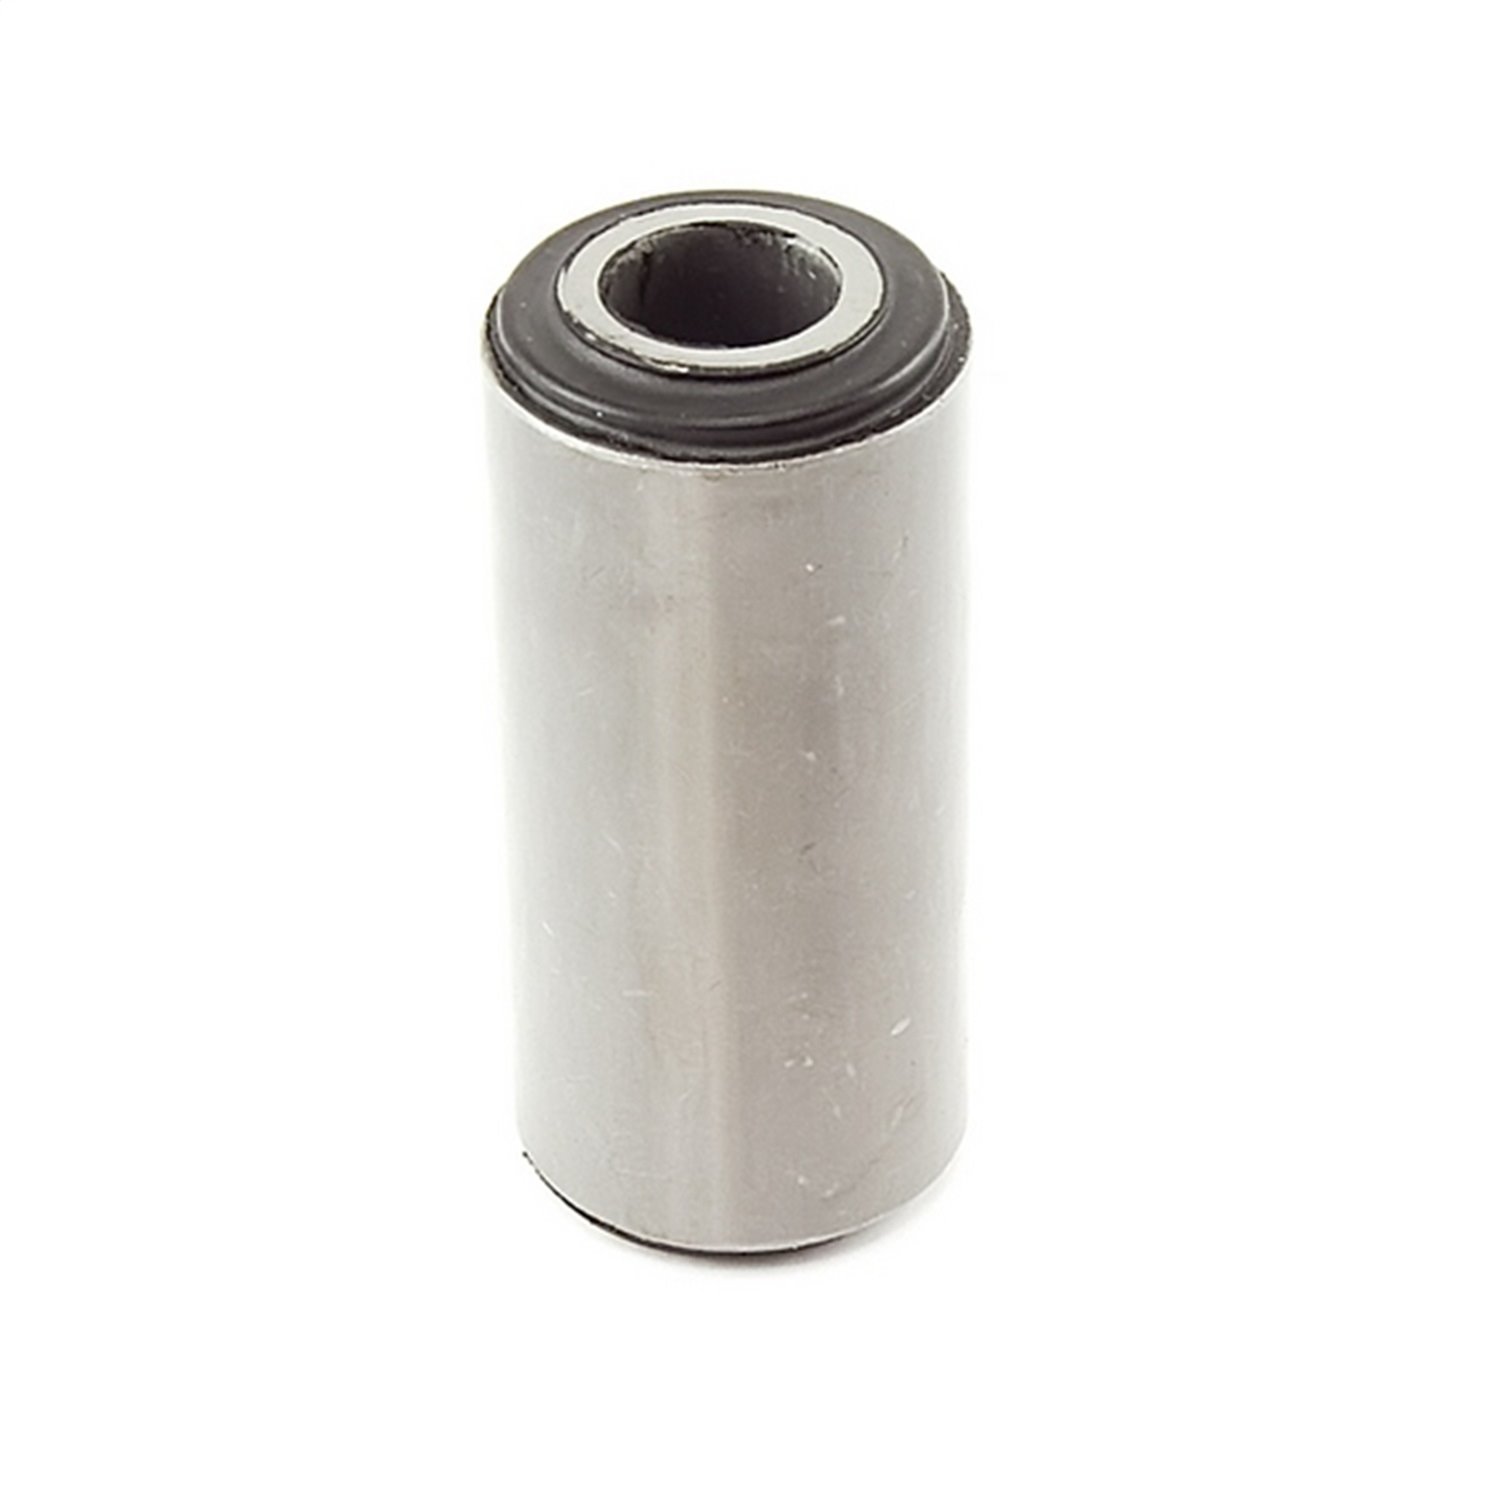 Replacement leaf spring bushing from Omix-ADA, Fits shackle eye on 78-91 Jeep DJ-5 leaf spri